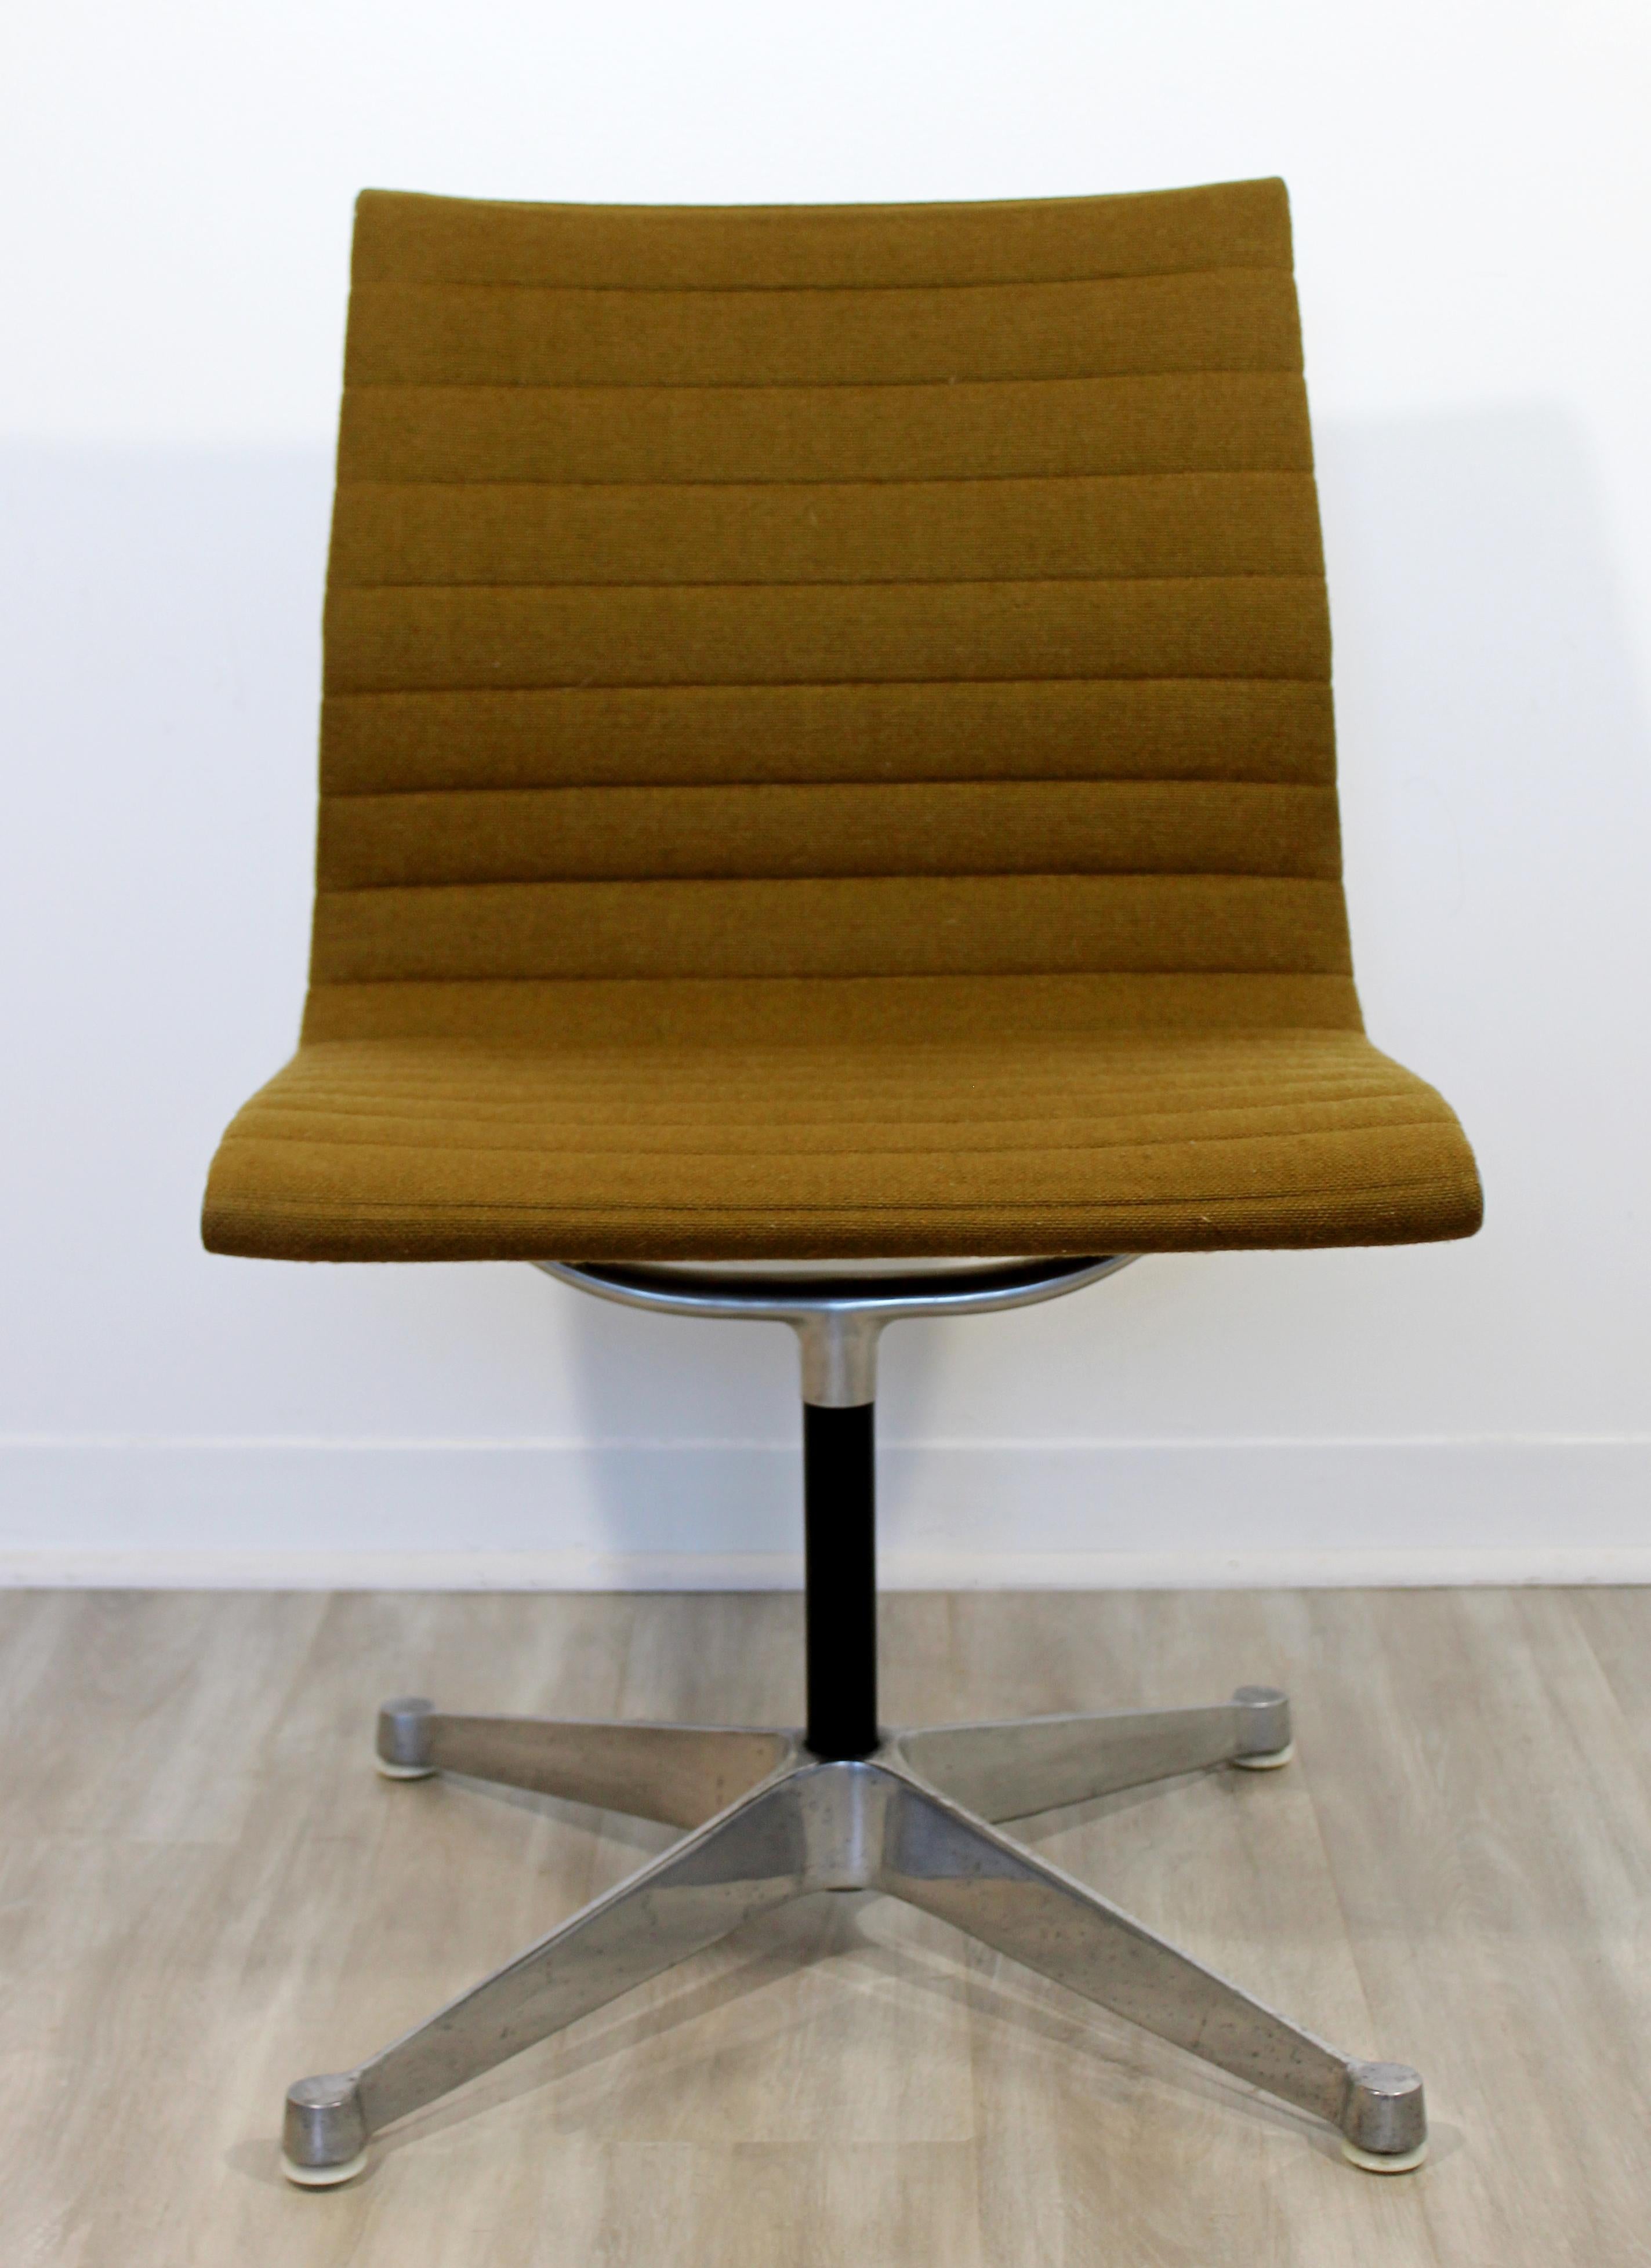 For your consideration is an original, aluminum Group side chair, by Charles Eames for Herman Miller, circa the 1950s. In excellent vintage condition. The dimensions are 20